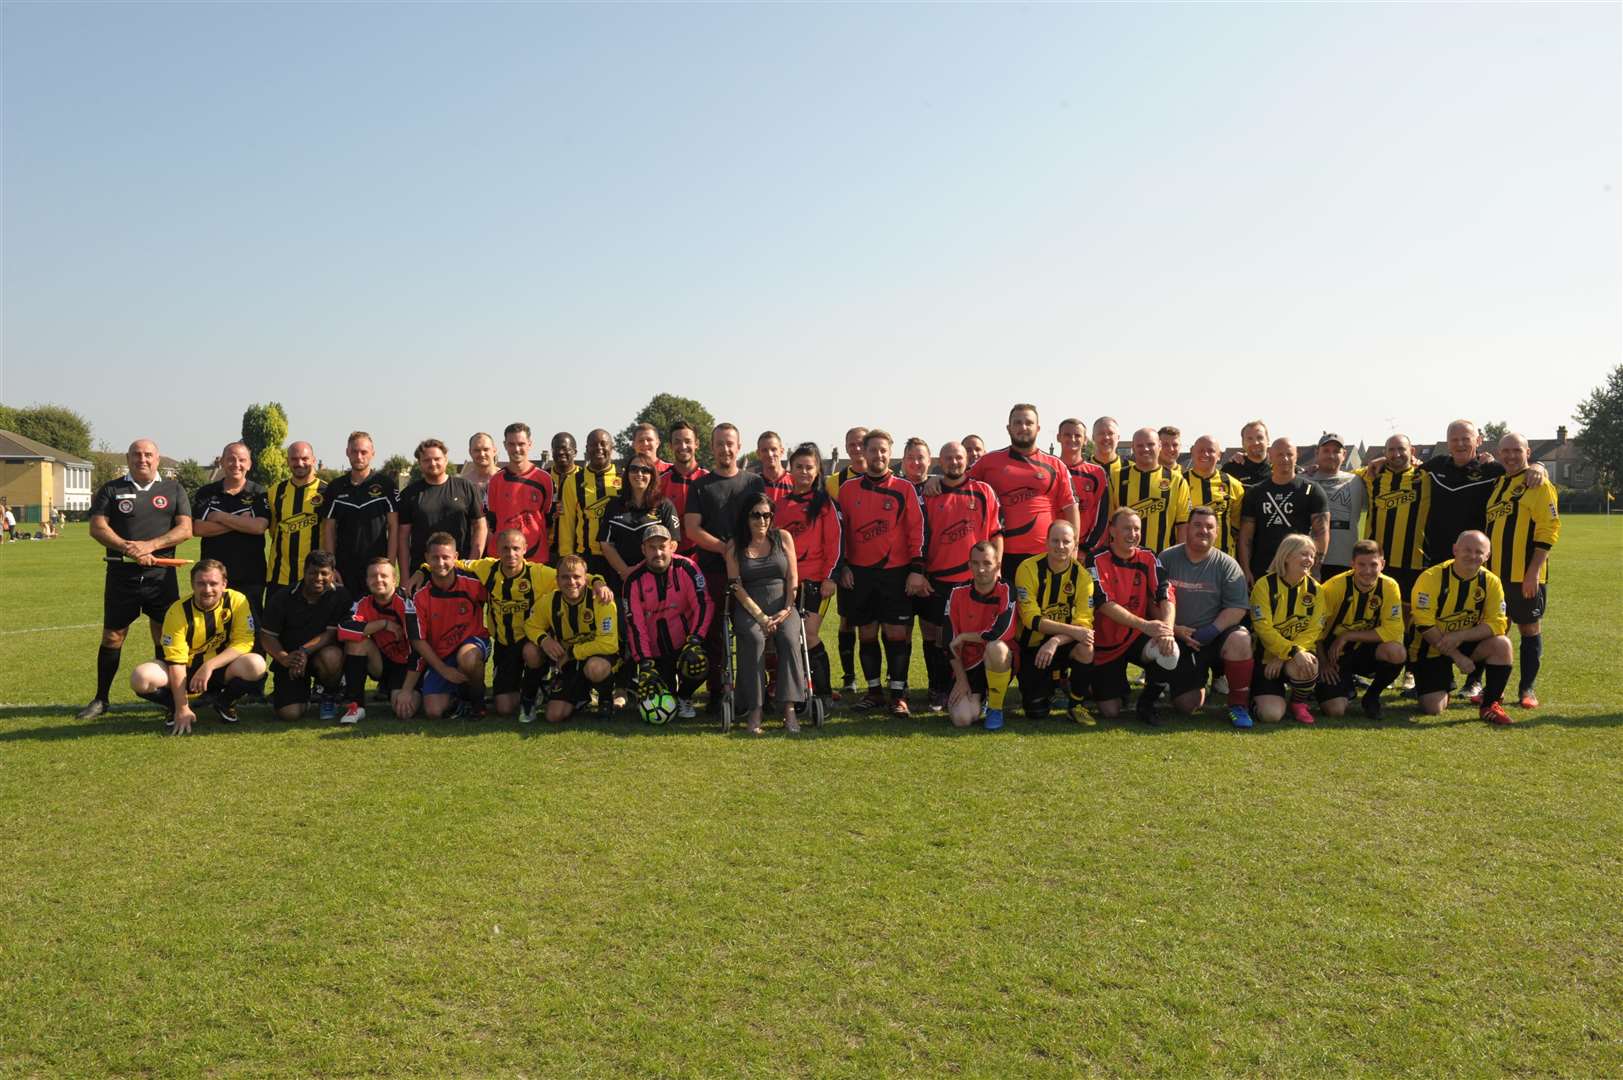 Broomfield Park, Broomfield Road, Swanscombe..Charity football match & raffle for Julie Wakefield..Teams: Swanscombe Tigers Parents (red) v Swanscombe Tigers Managers/coaches (yellow)..Picture: Steve Crispe. (3920093)